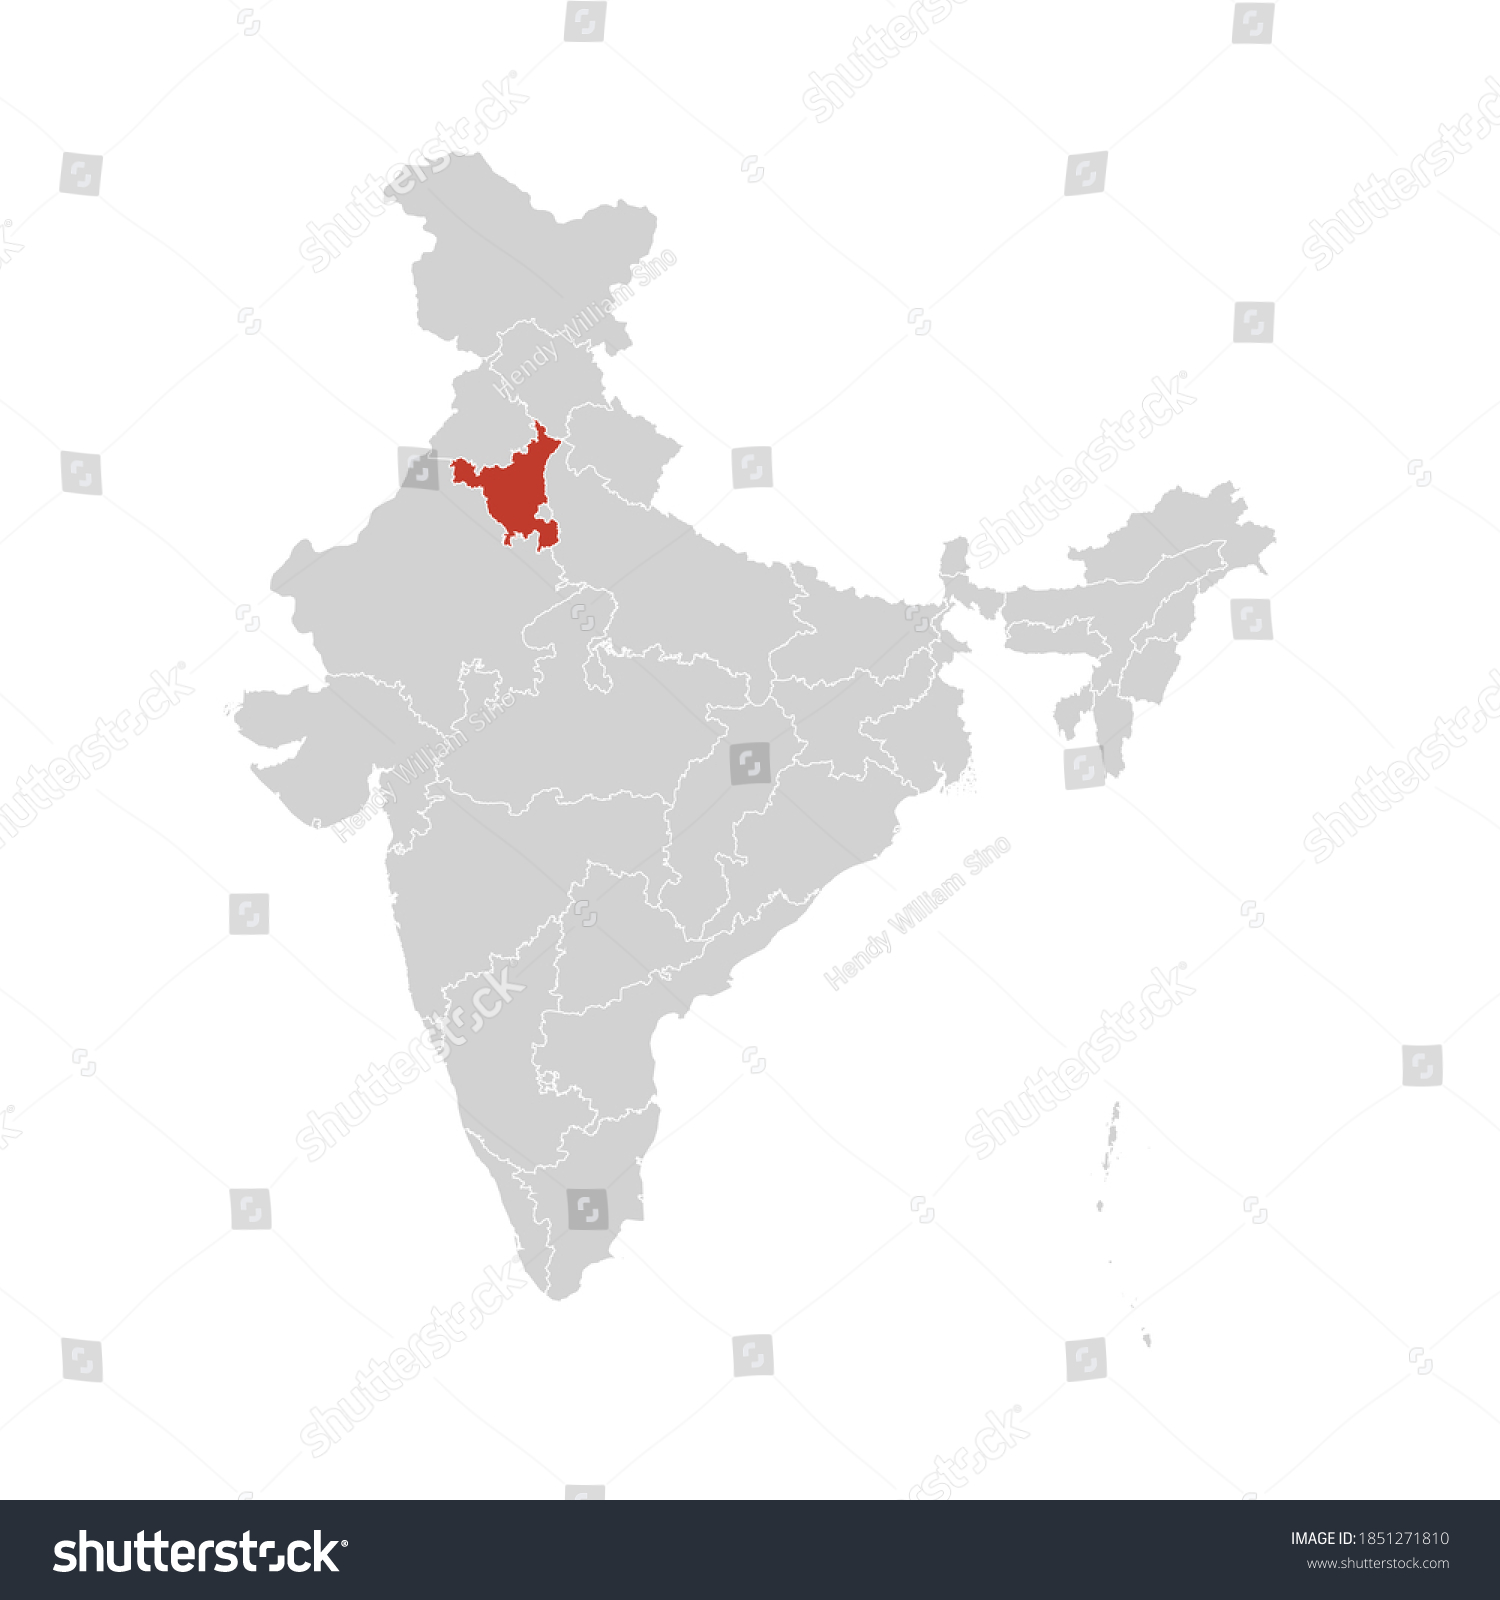 Haryana Map In India Haryana Highlighted On India Map Eps Stock Vector (Royalty Free) 1851271810  | Shutterstock